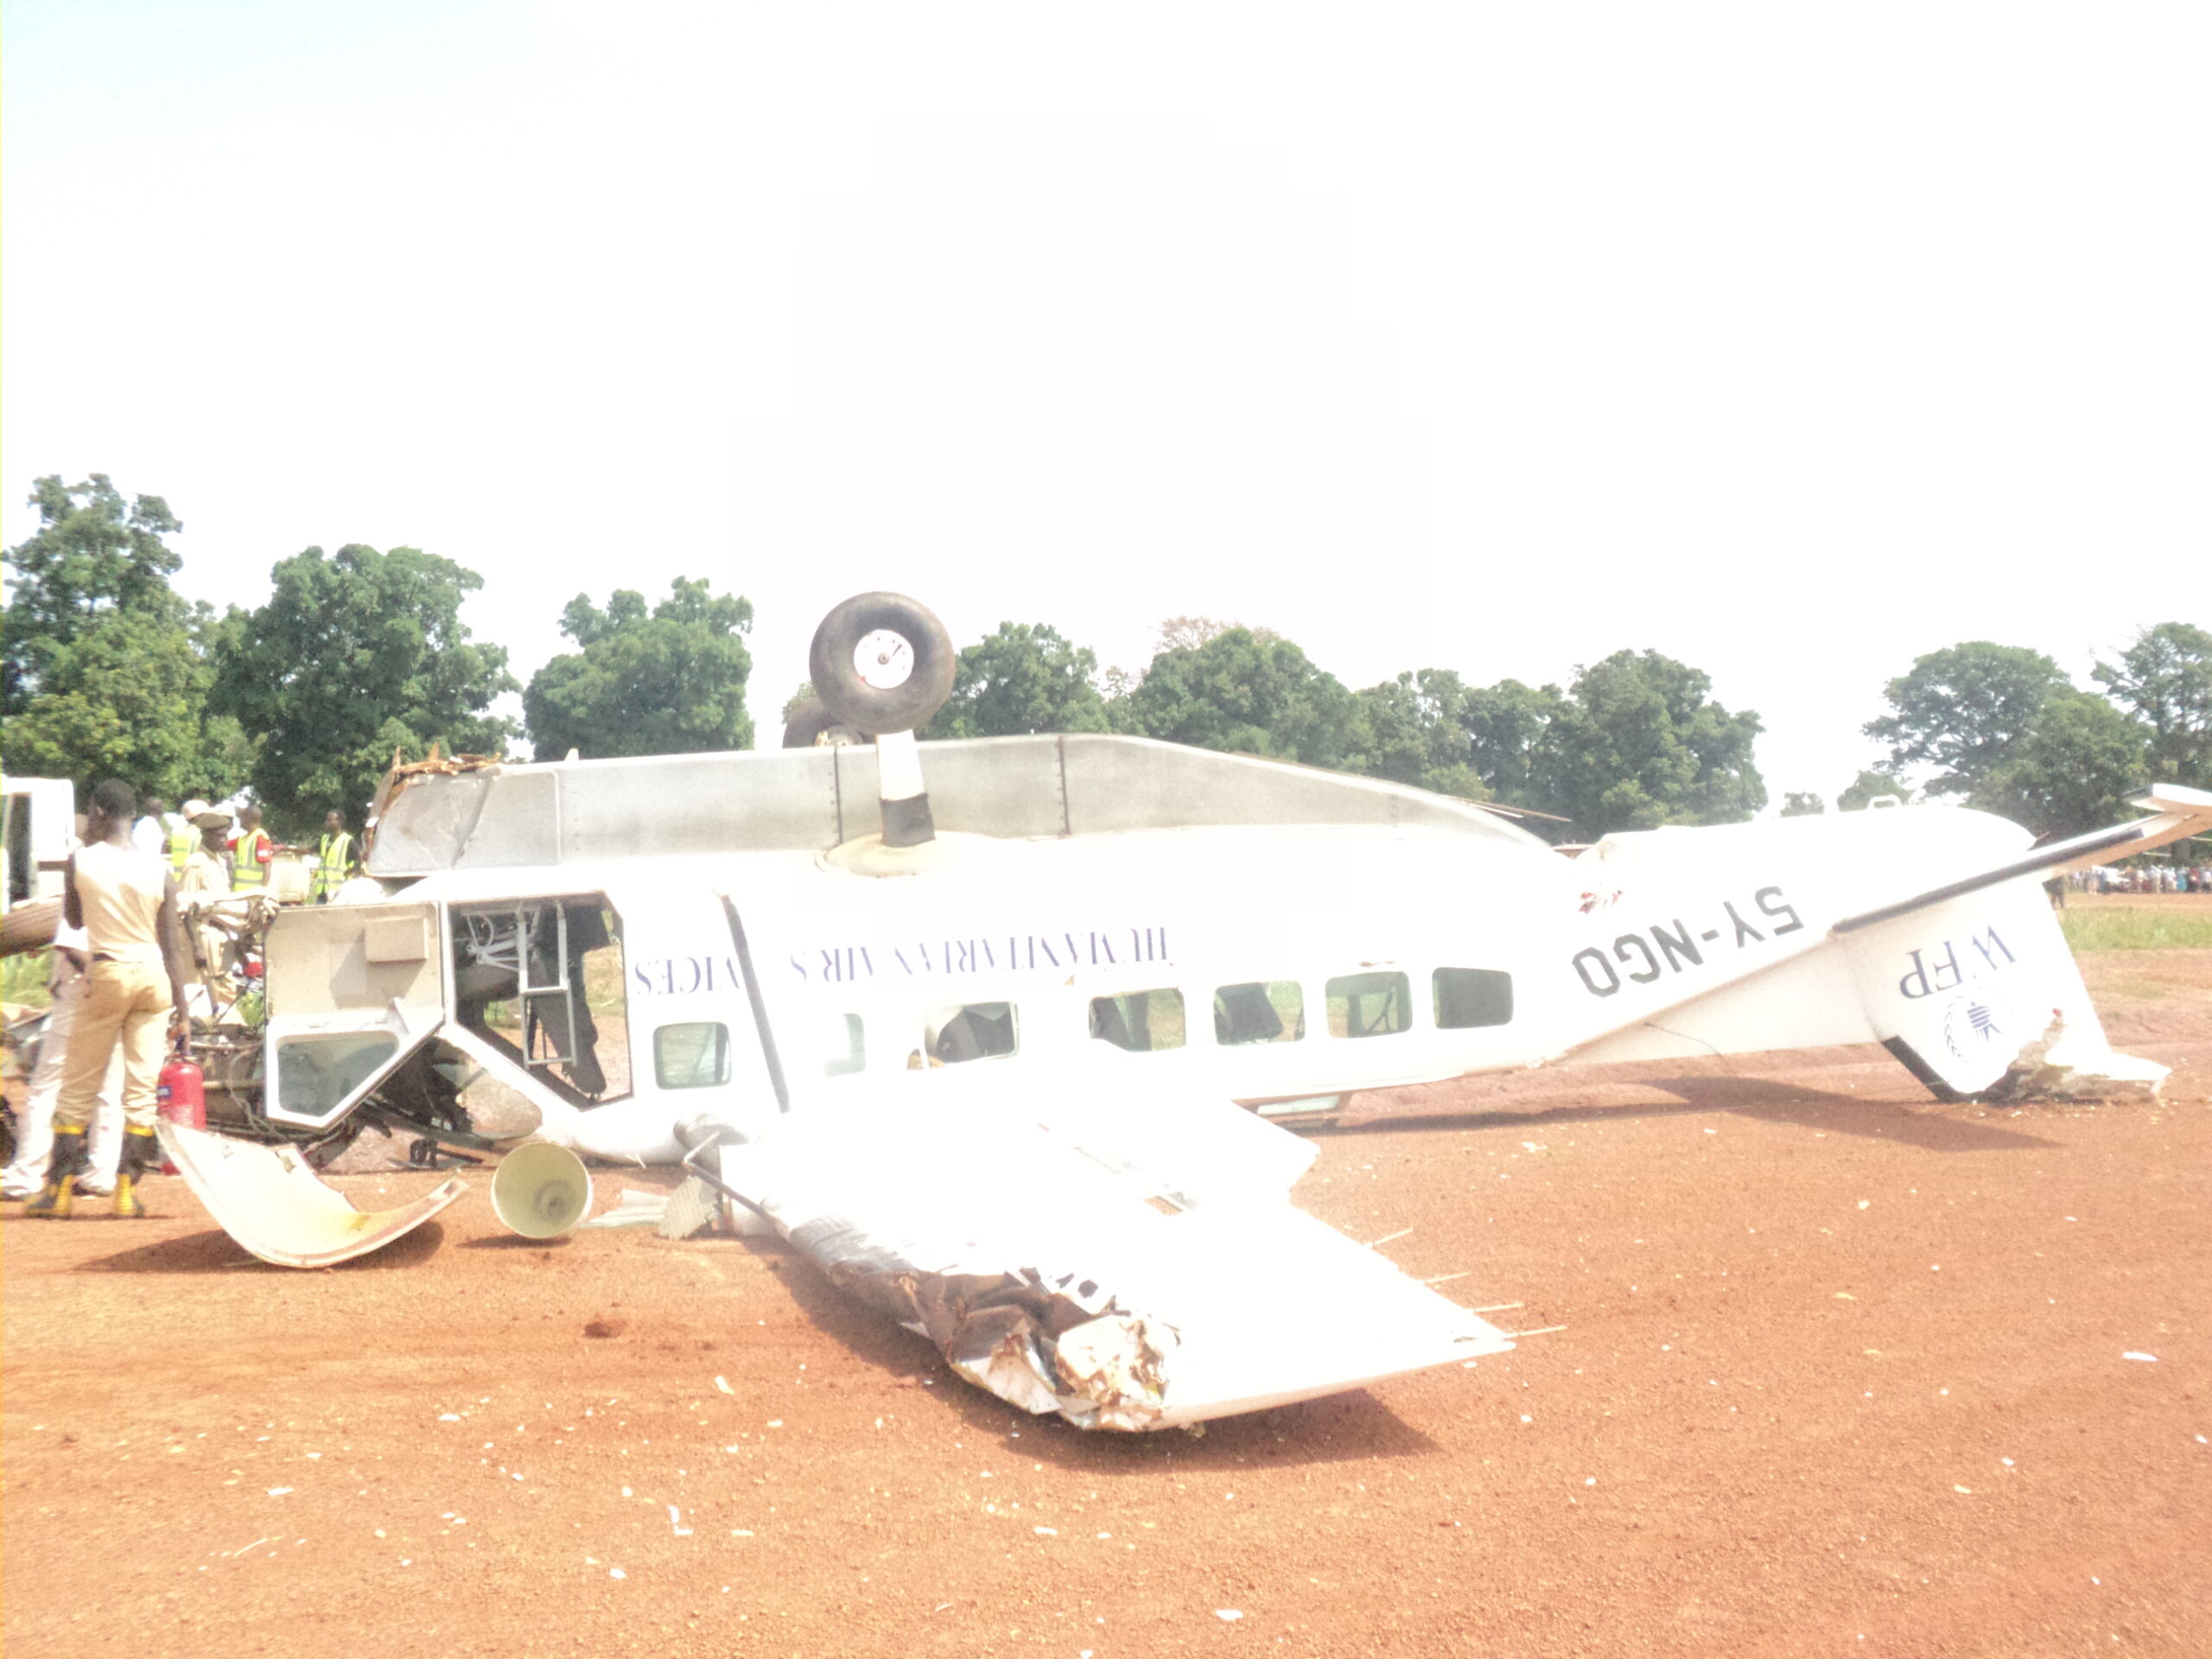 WFP plane at Yambio Air Strip after the crash on 2 May 2012. (Photo: Mbugo William Phillip)